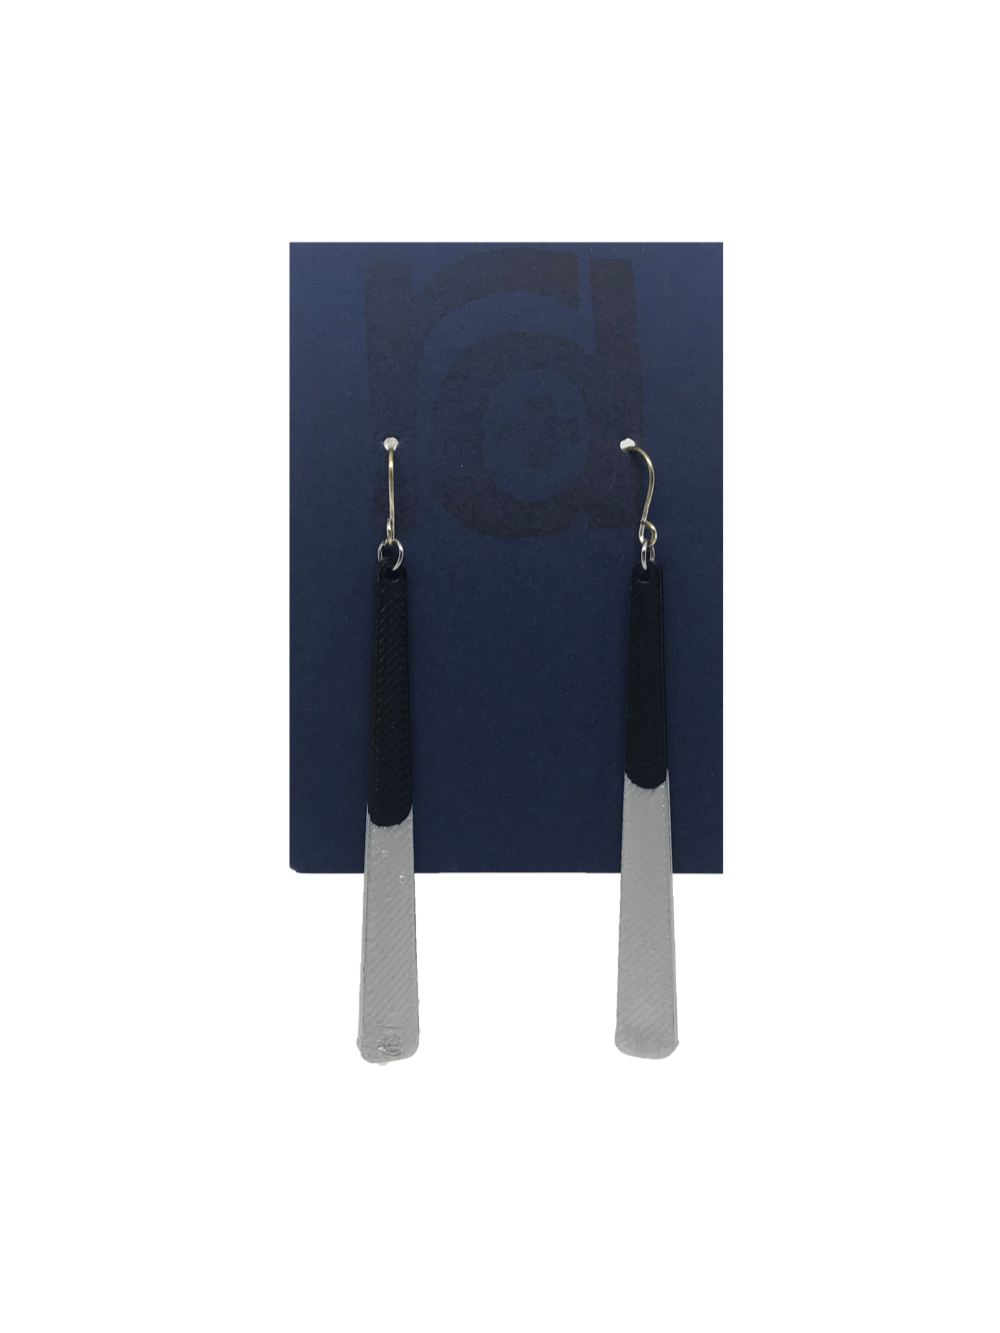 Shown on a sustainable dark blue earring card, these earrings are long dangles that flare out slightly. The black plant based earring is dipped into metallic silver paint to give a perfect shimmering accent.